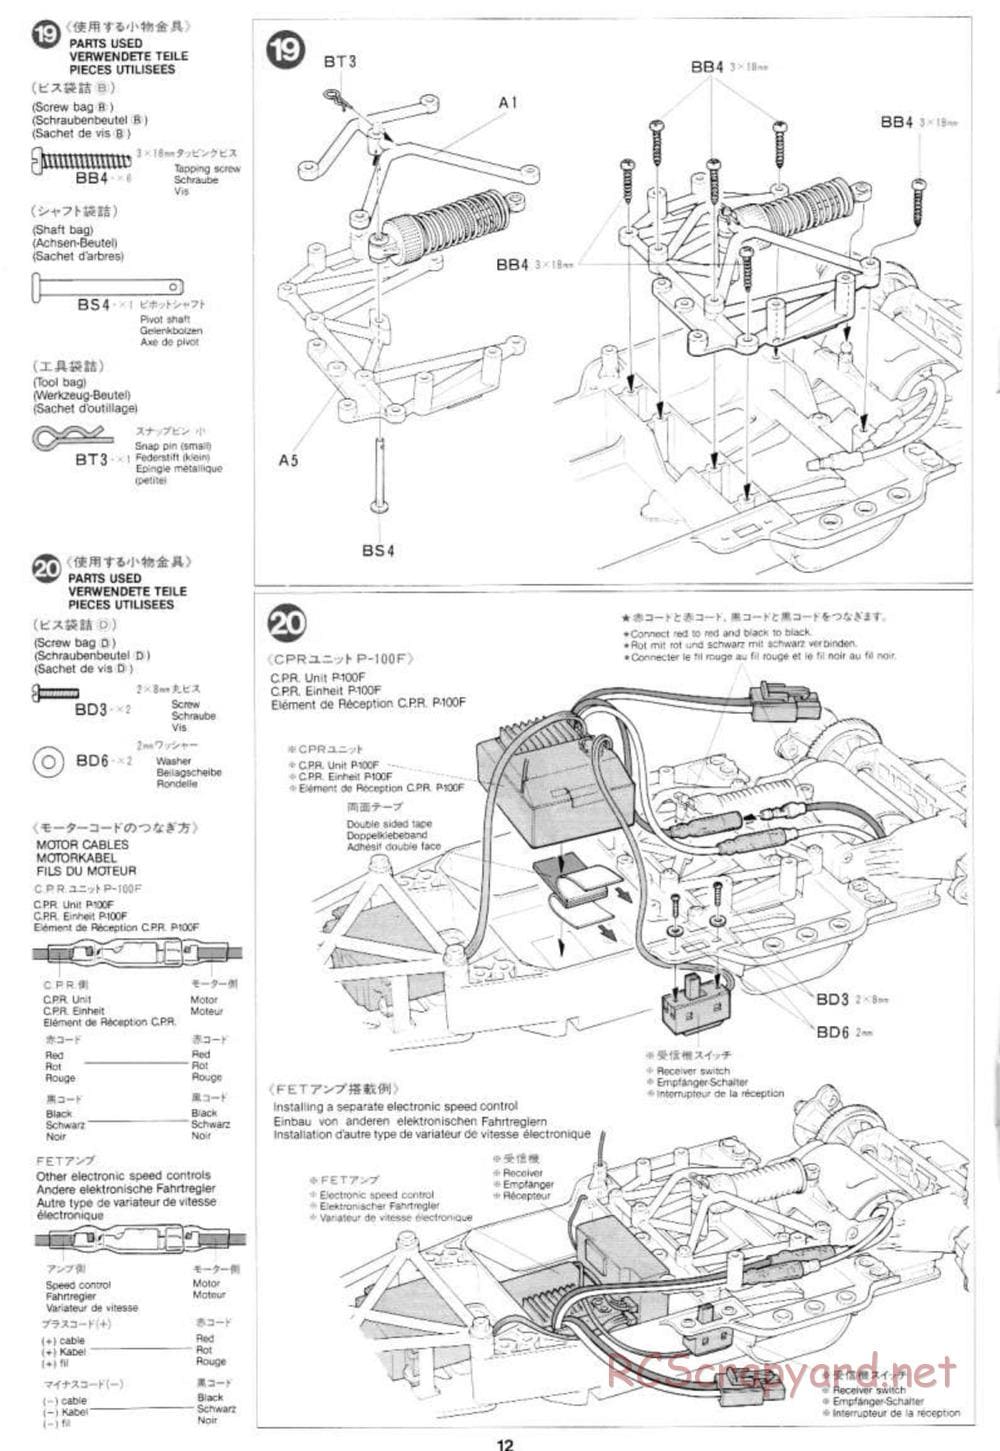 Tamiya - Mercedes-Benz C11 - Group-C Chassis - Manual - Page 12